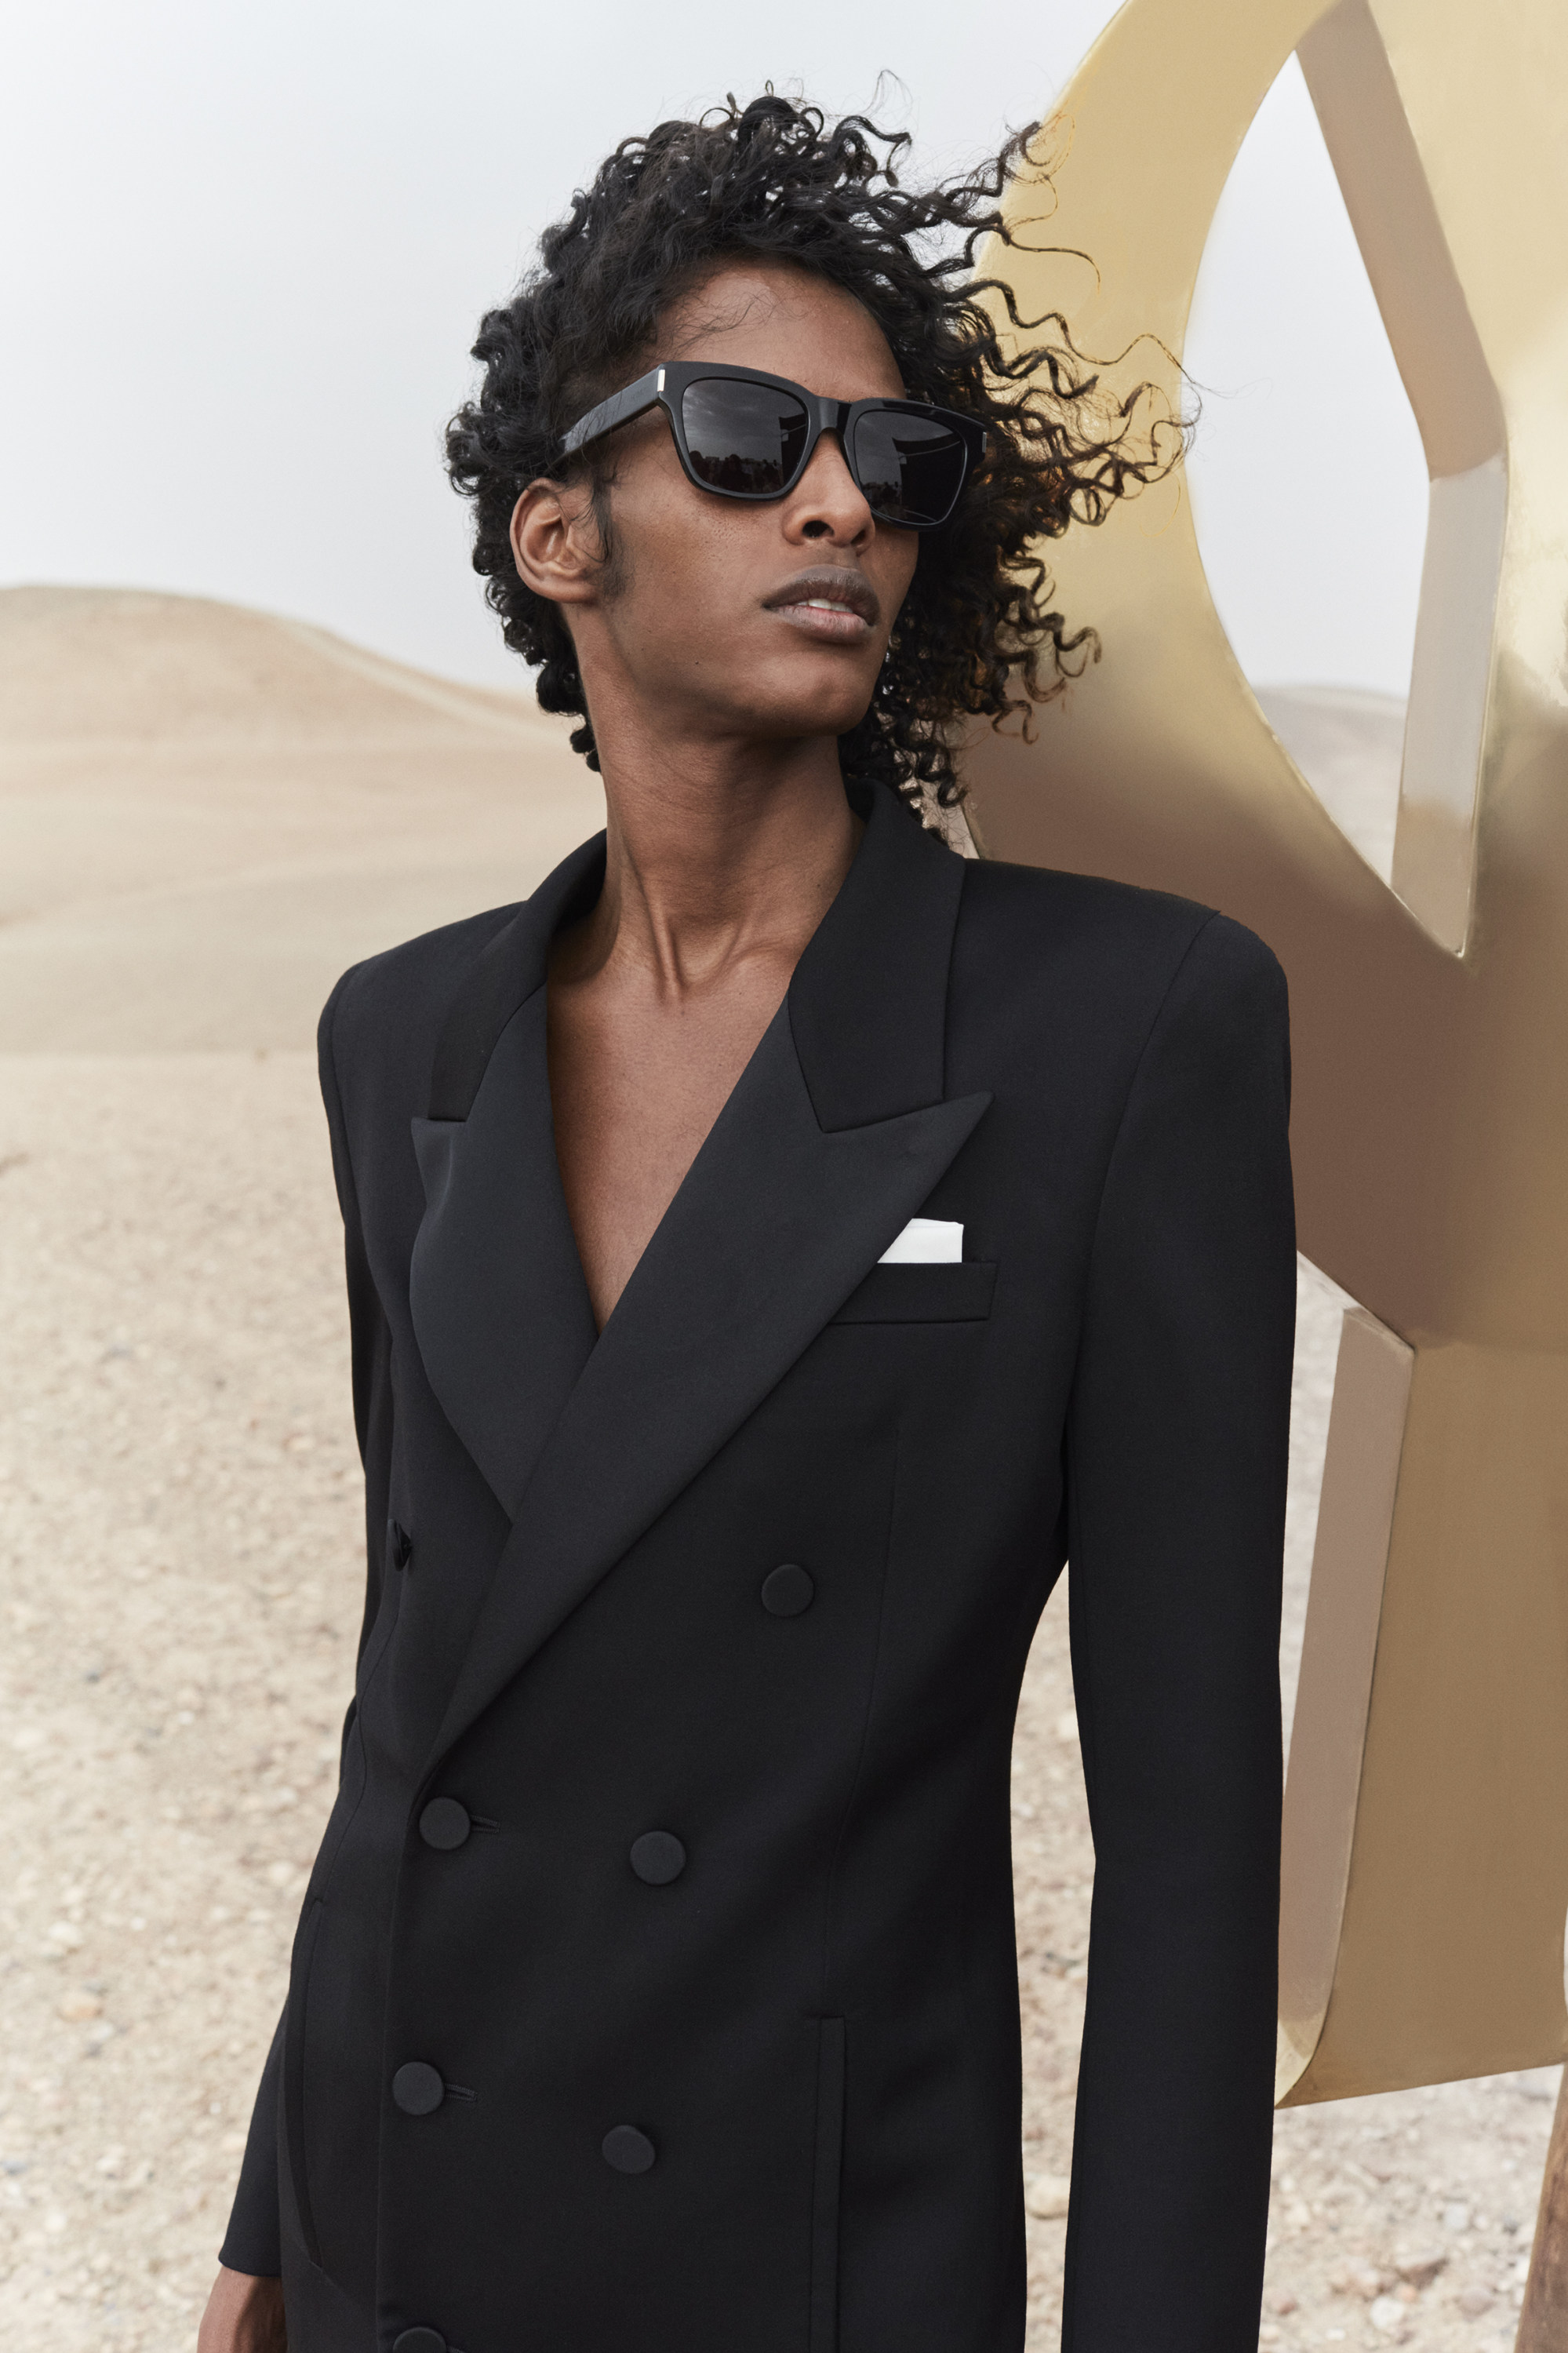 YSL spring/summer 2023 show in Moroccan desert is reminiscent of a ...